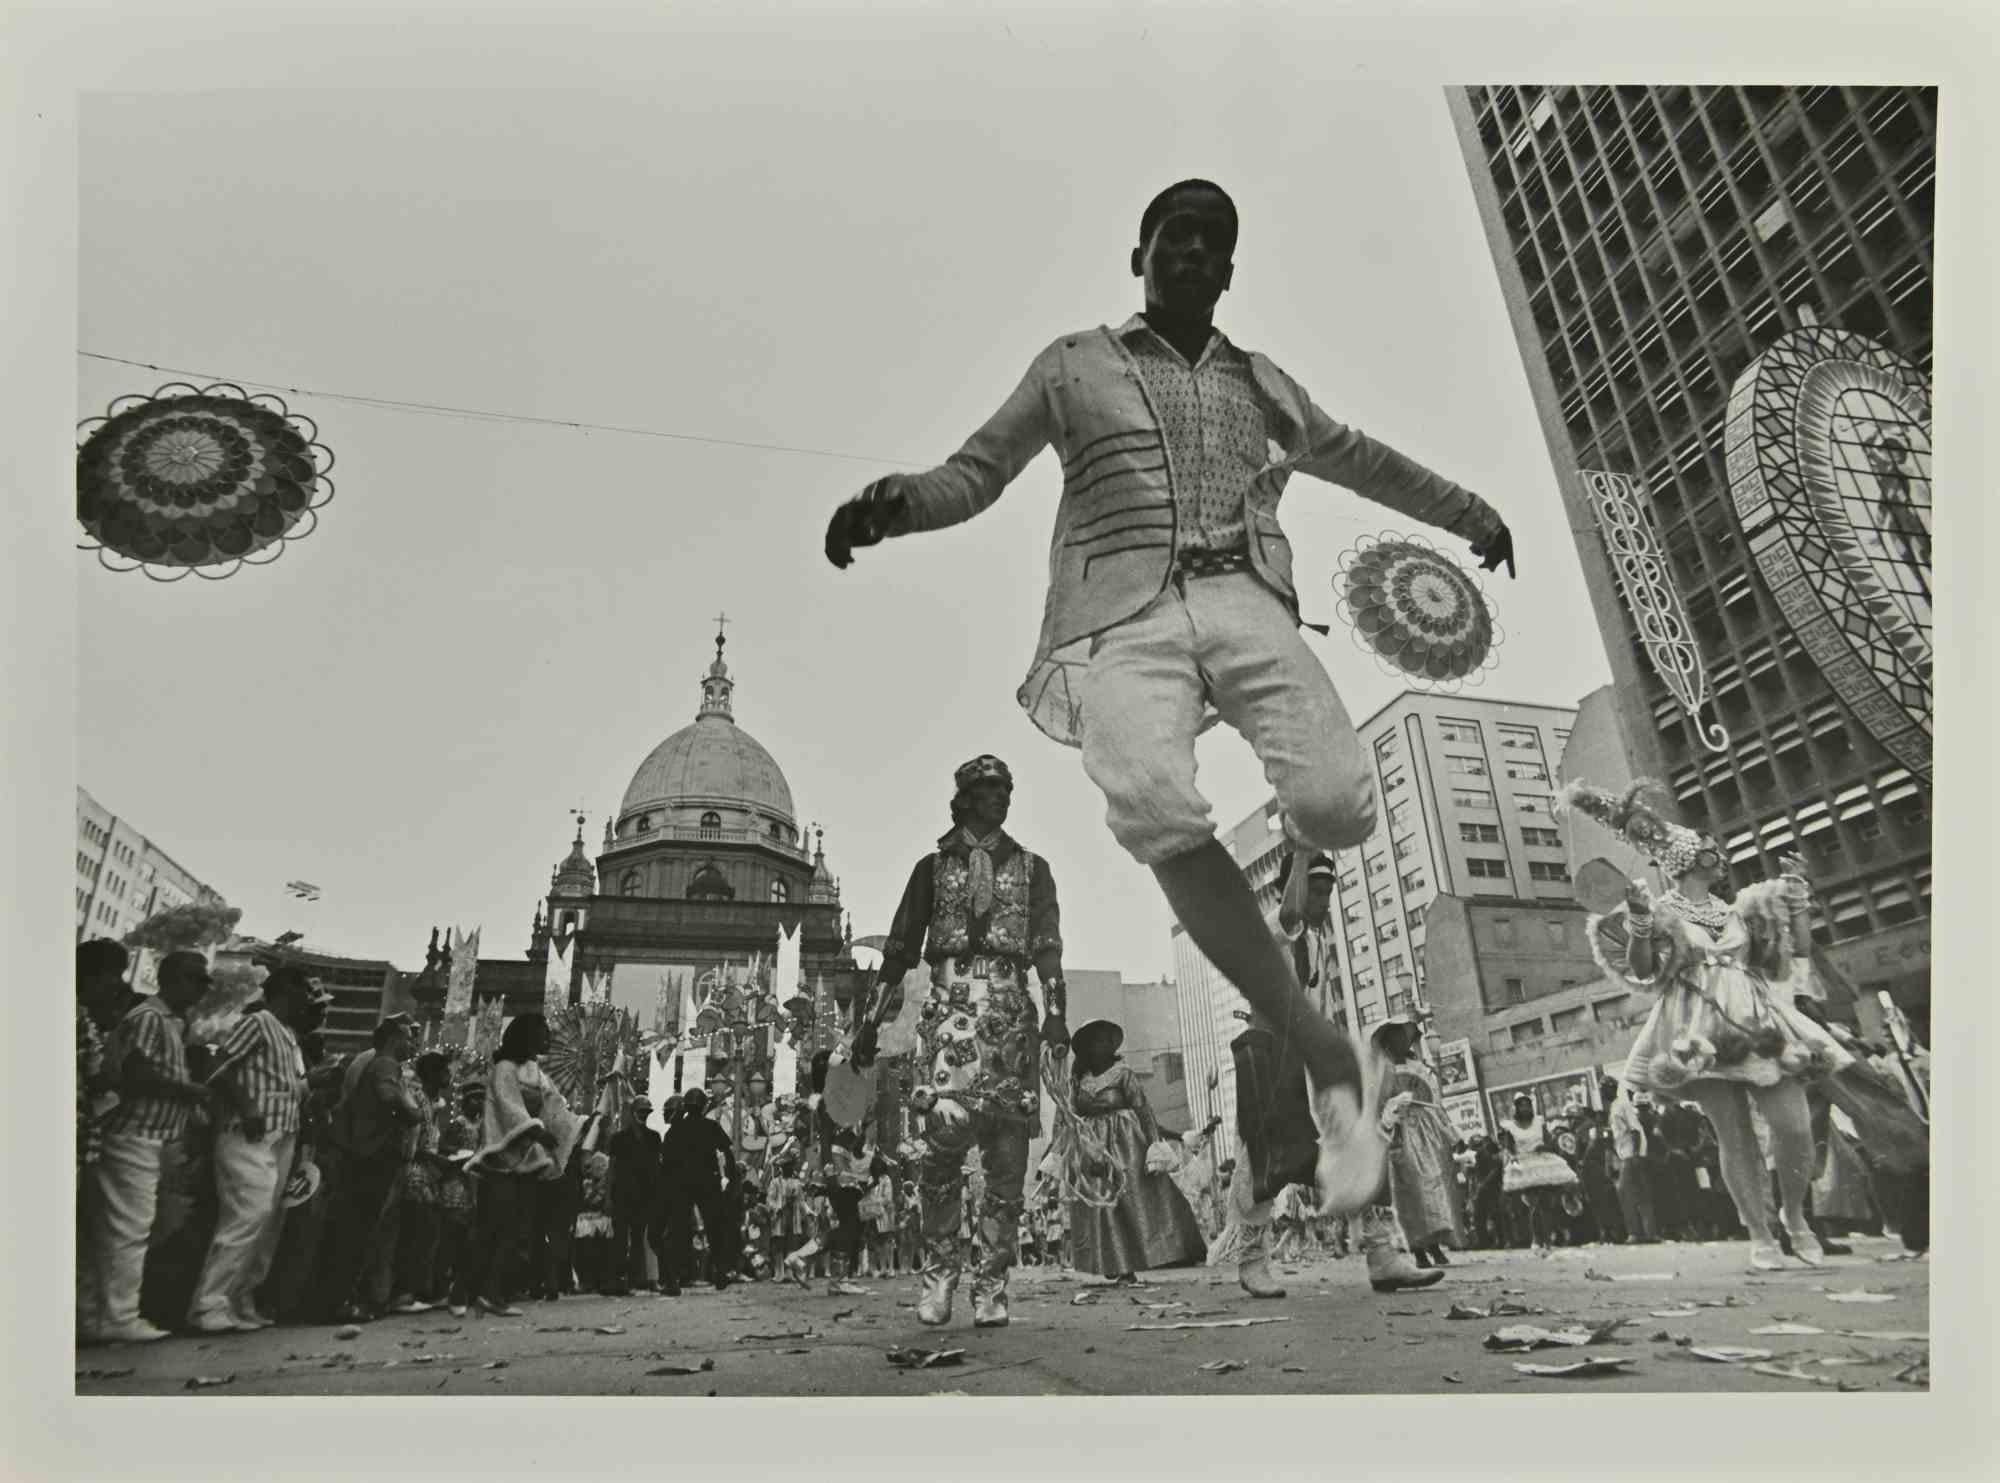 Unknown Figurative Photograph - Parade in San Paolo - Vintage b/w Photo - 1970s